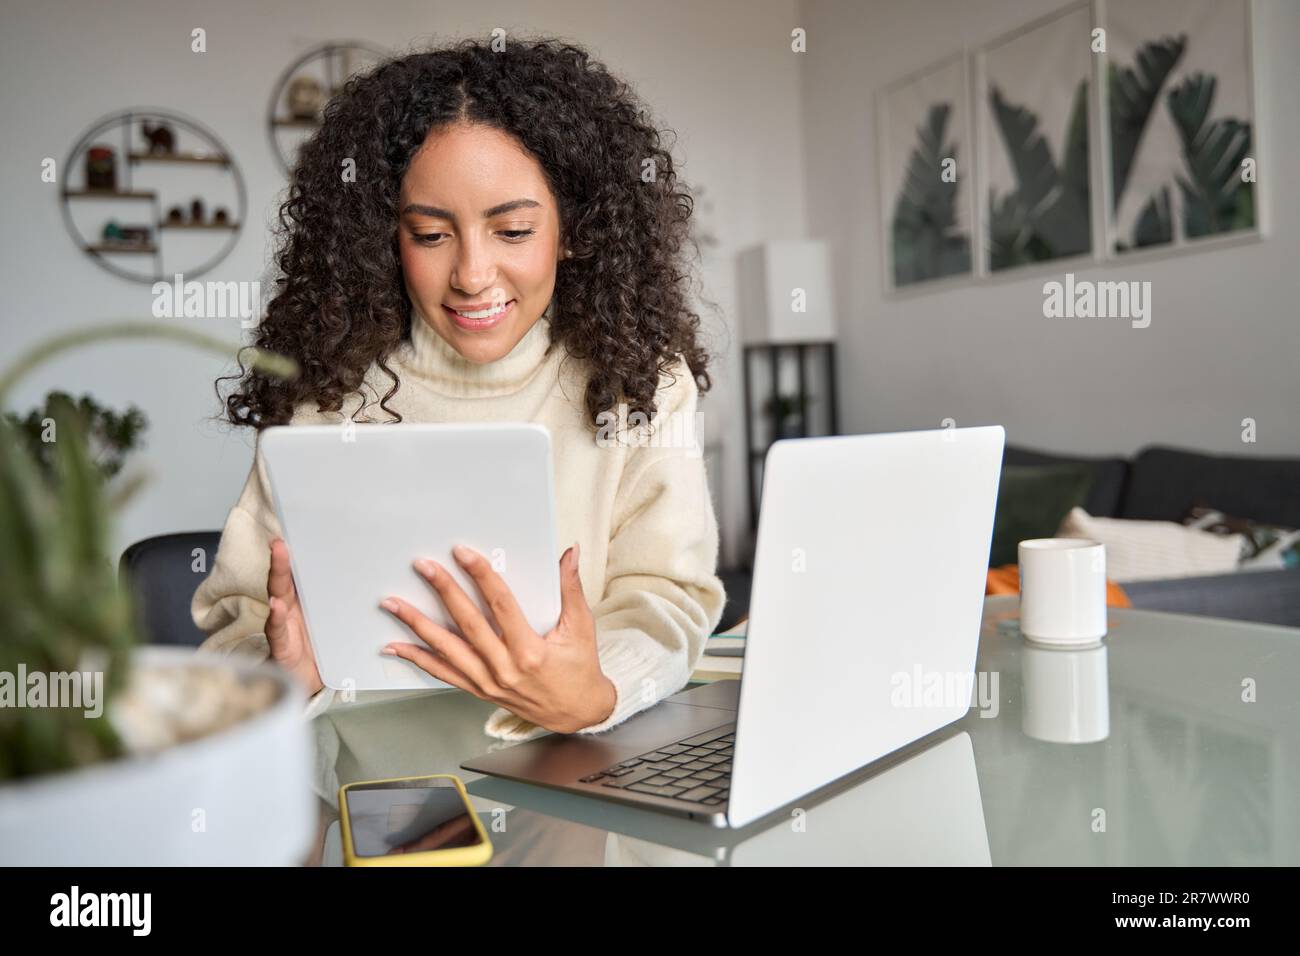 Smiling latin girl student using digital tablet elearning at home. Stock Photo